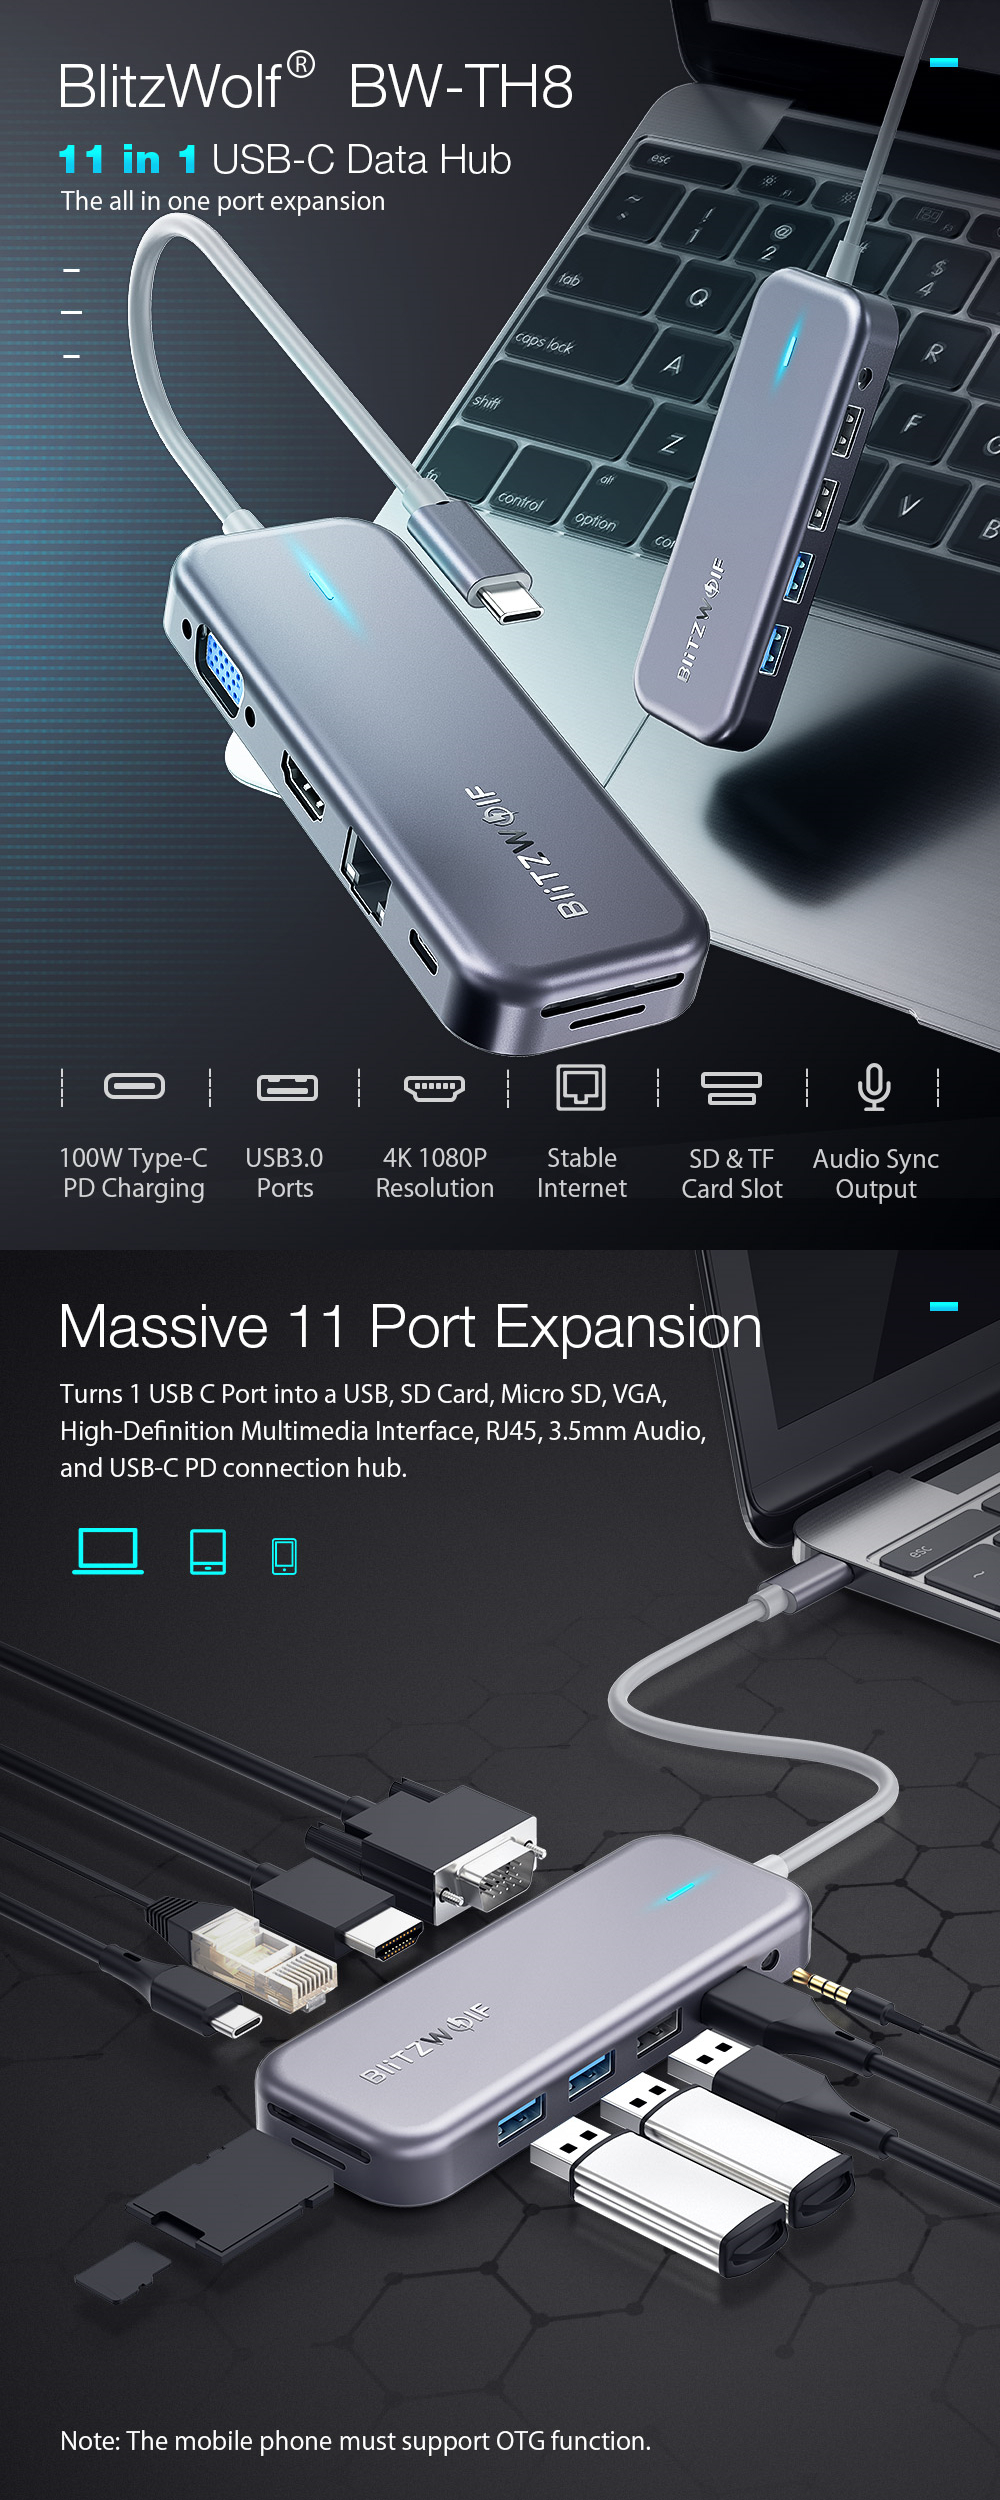 BlitzWolf® BW-TH8 11 in 1 USB-C Data Hub with 100W Type-C PD Power Delivery 2 USB3.0 & 2 USB2.0 4K@30HZ & 1080P@60HZ Resolution Stable Internet SD & TF Card Slot & Audio Sync Output